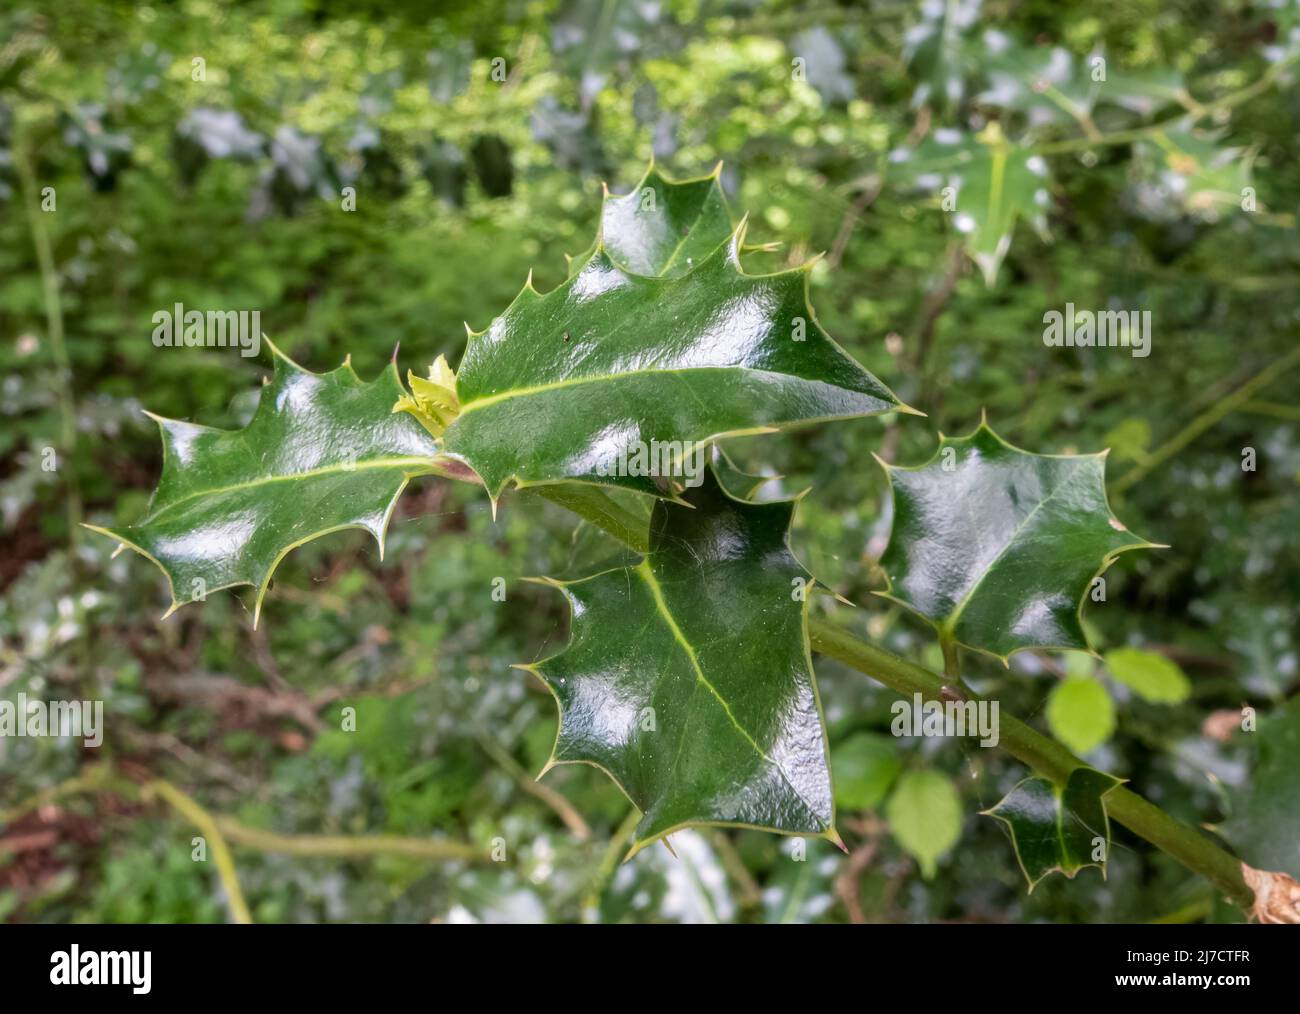 close up of dark green waxy pointed holly leaves (Ilex) Stock Photo